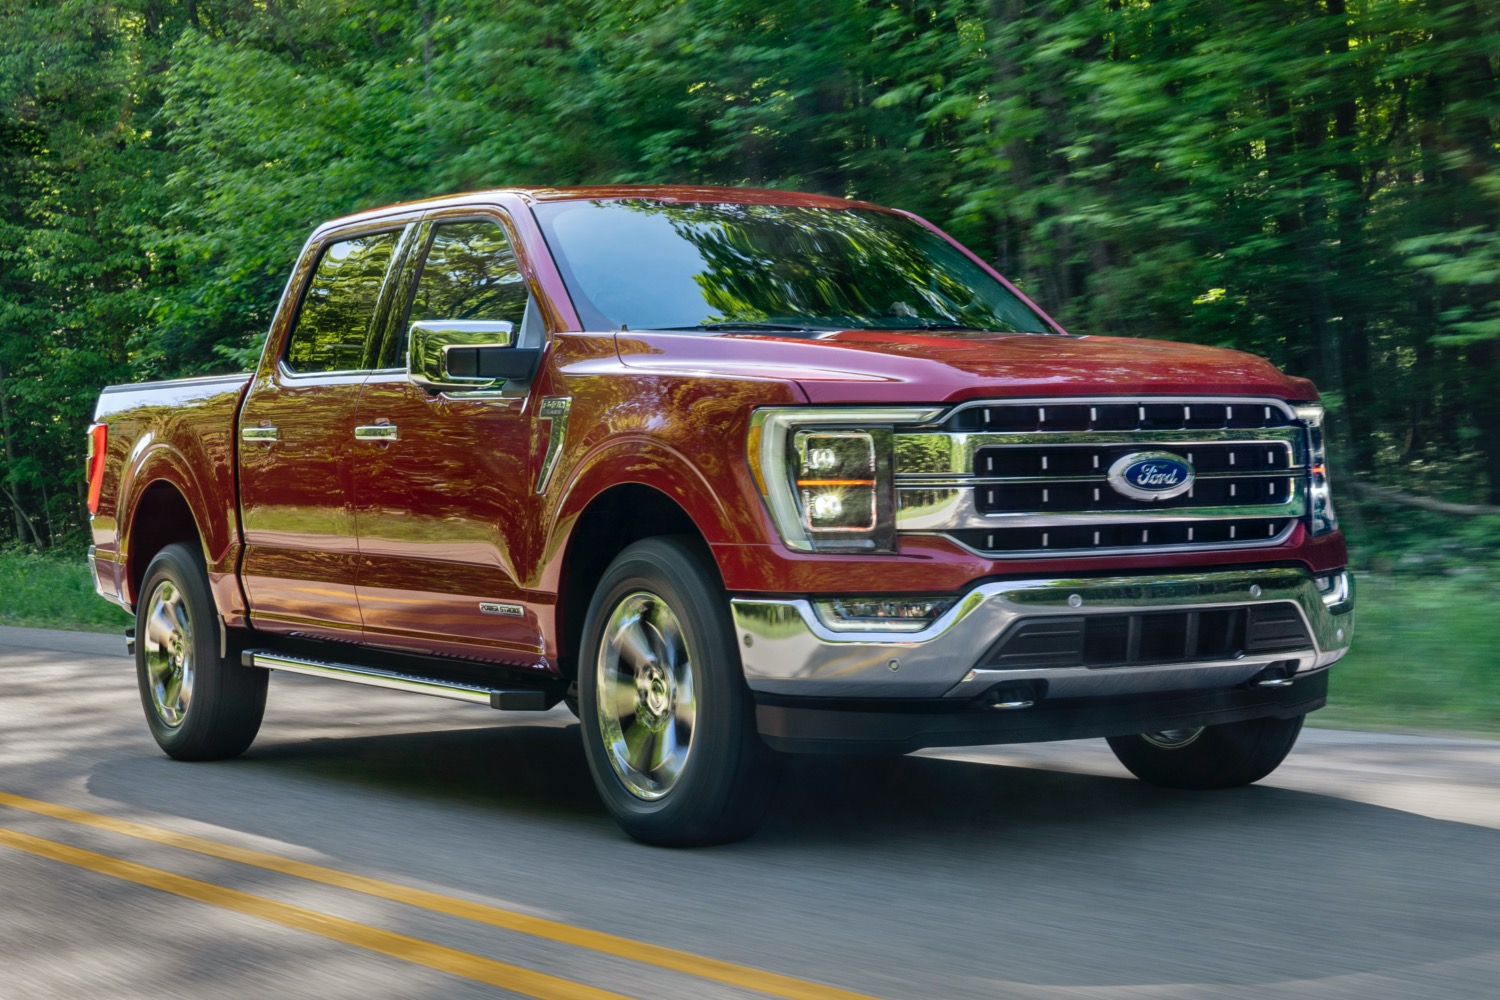 2021 F-150 Digital Manual Saves A Mountain Of Paper